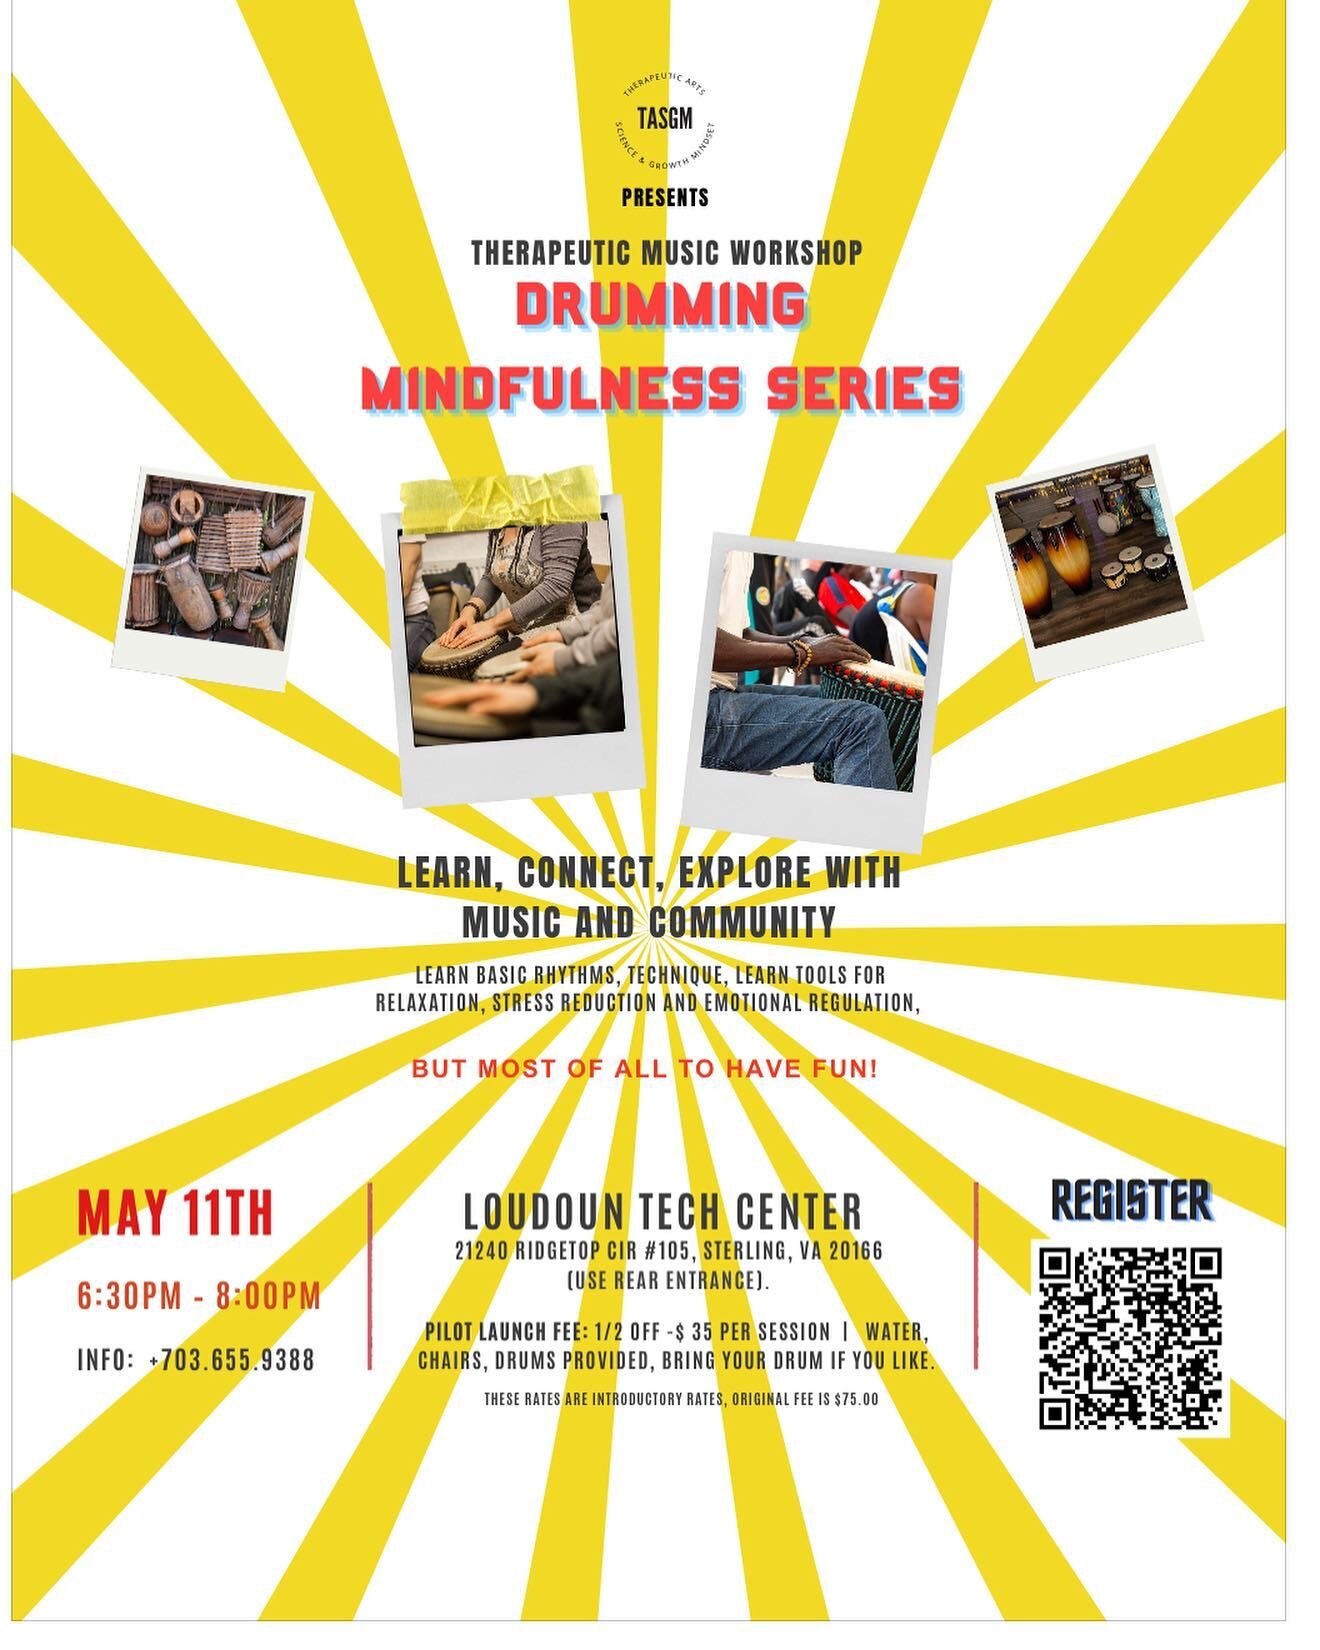 Our last Therapeutic Music workshop for Spring is on May 11th!  Please join us for a great experience!!! Register on our website! 

TASGM introduces our Therapeutic Music Series! 

Music is already Therapeutic, but what if you could learn tools using